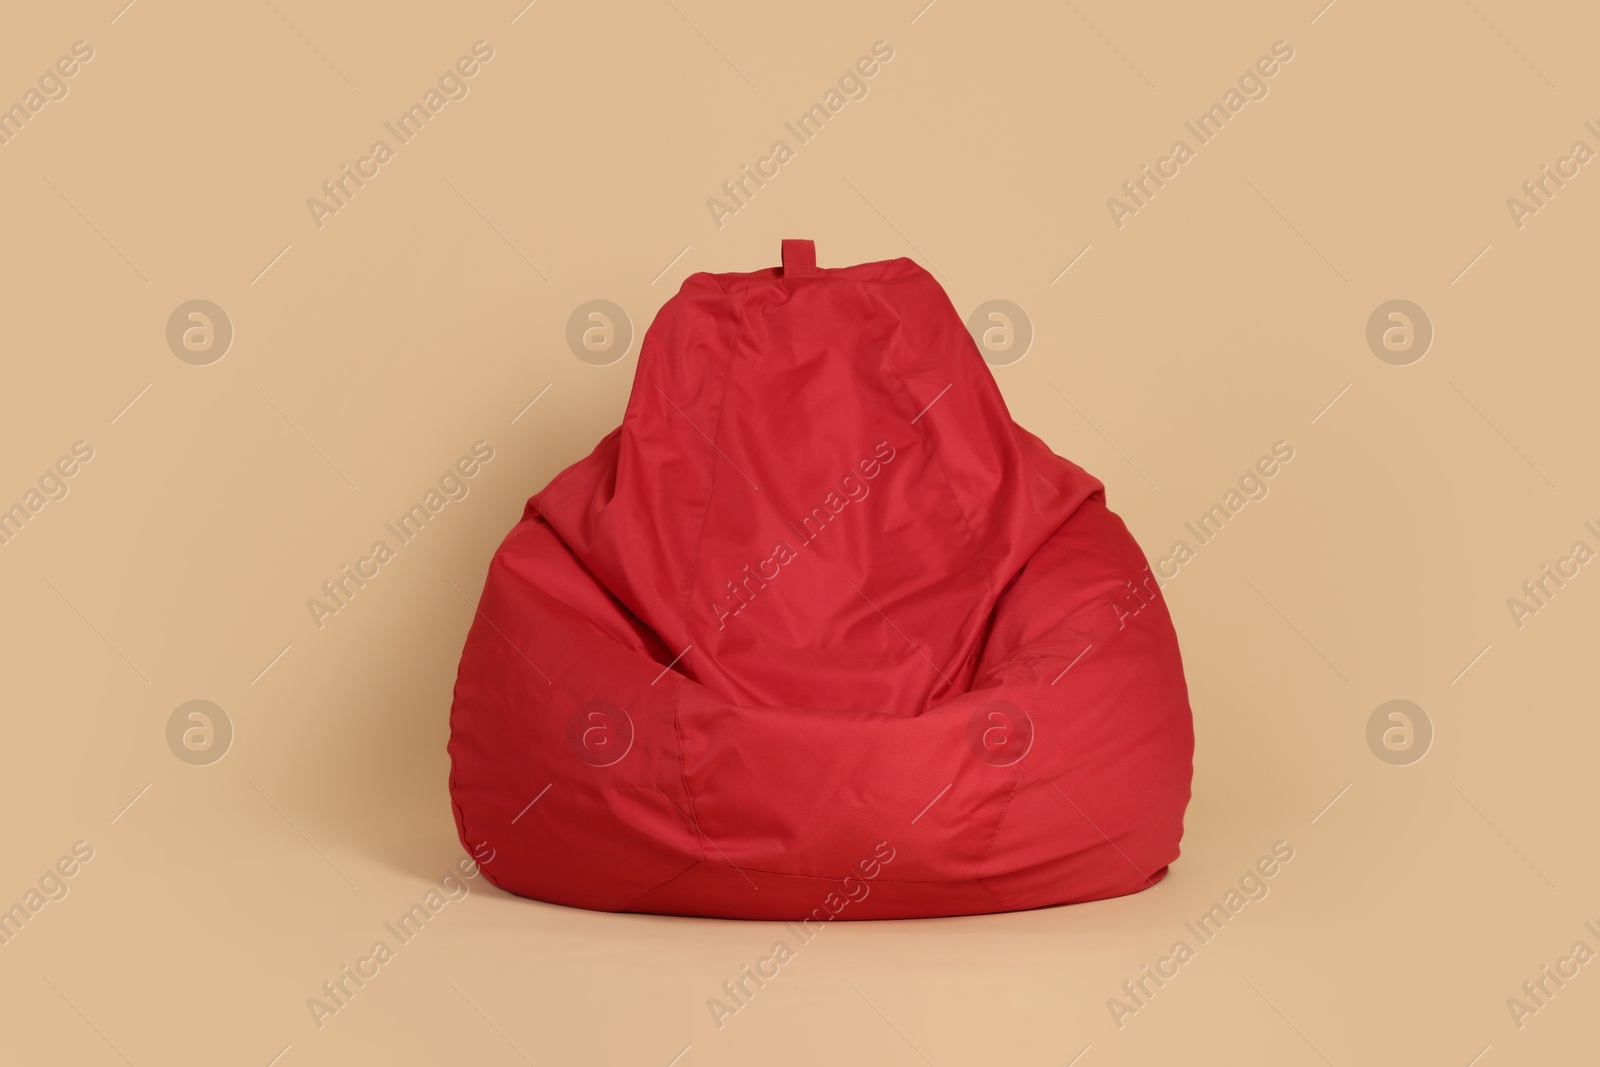 Photo of Red bean bag chair on beige background